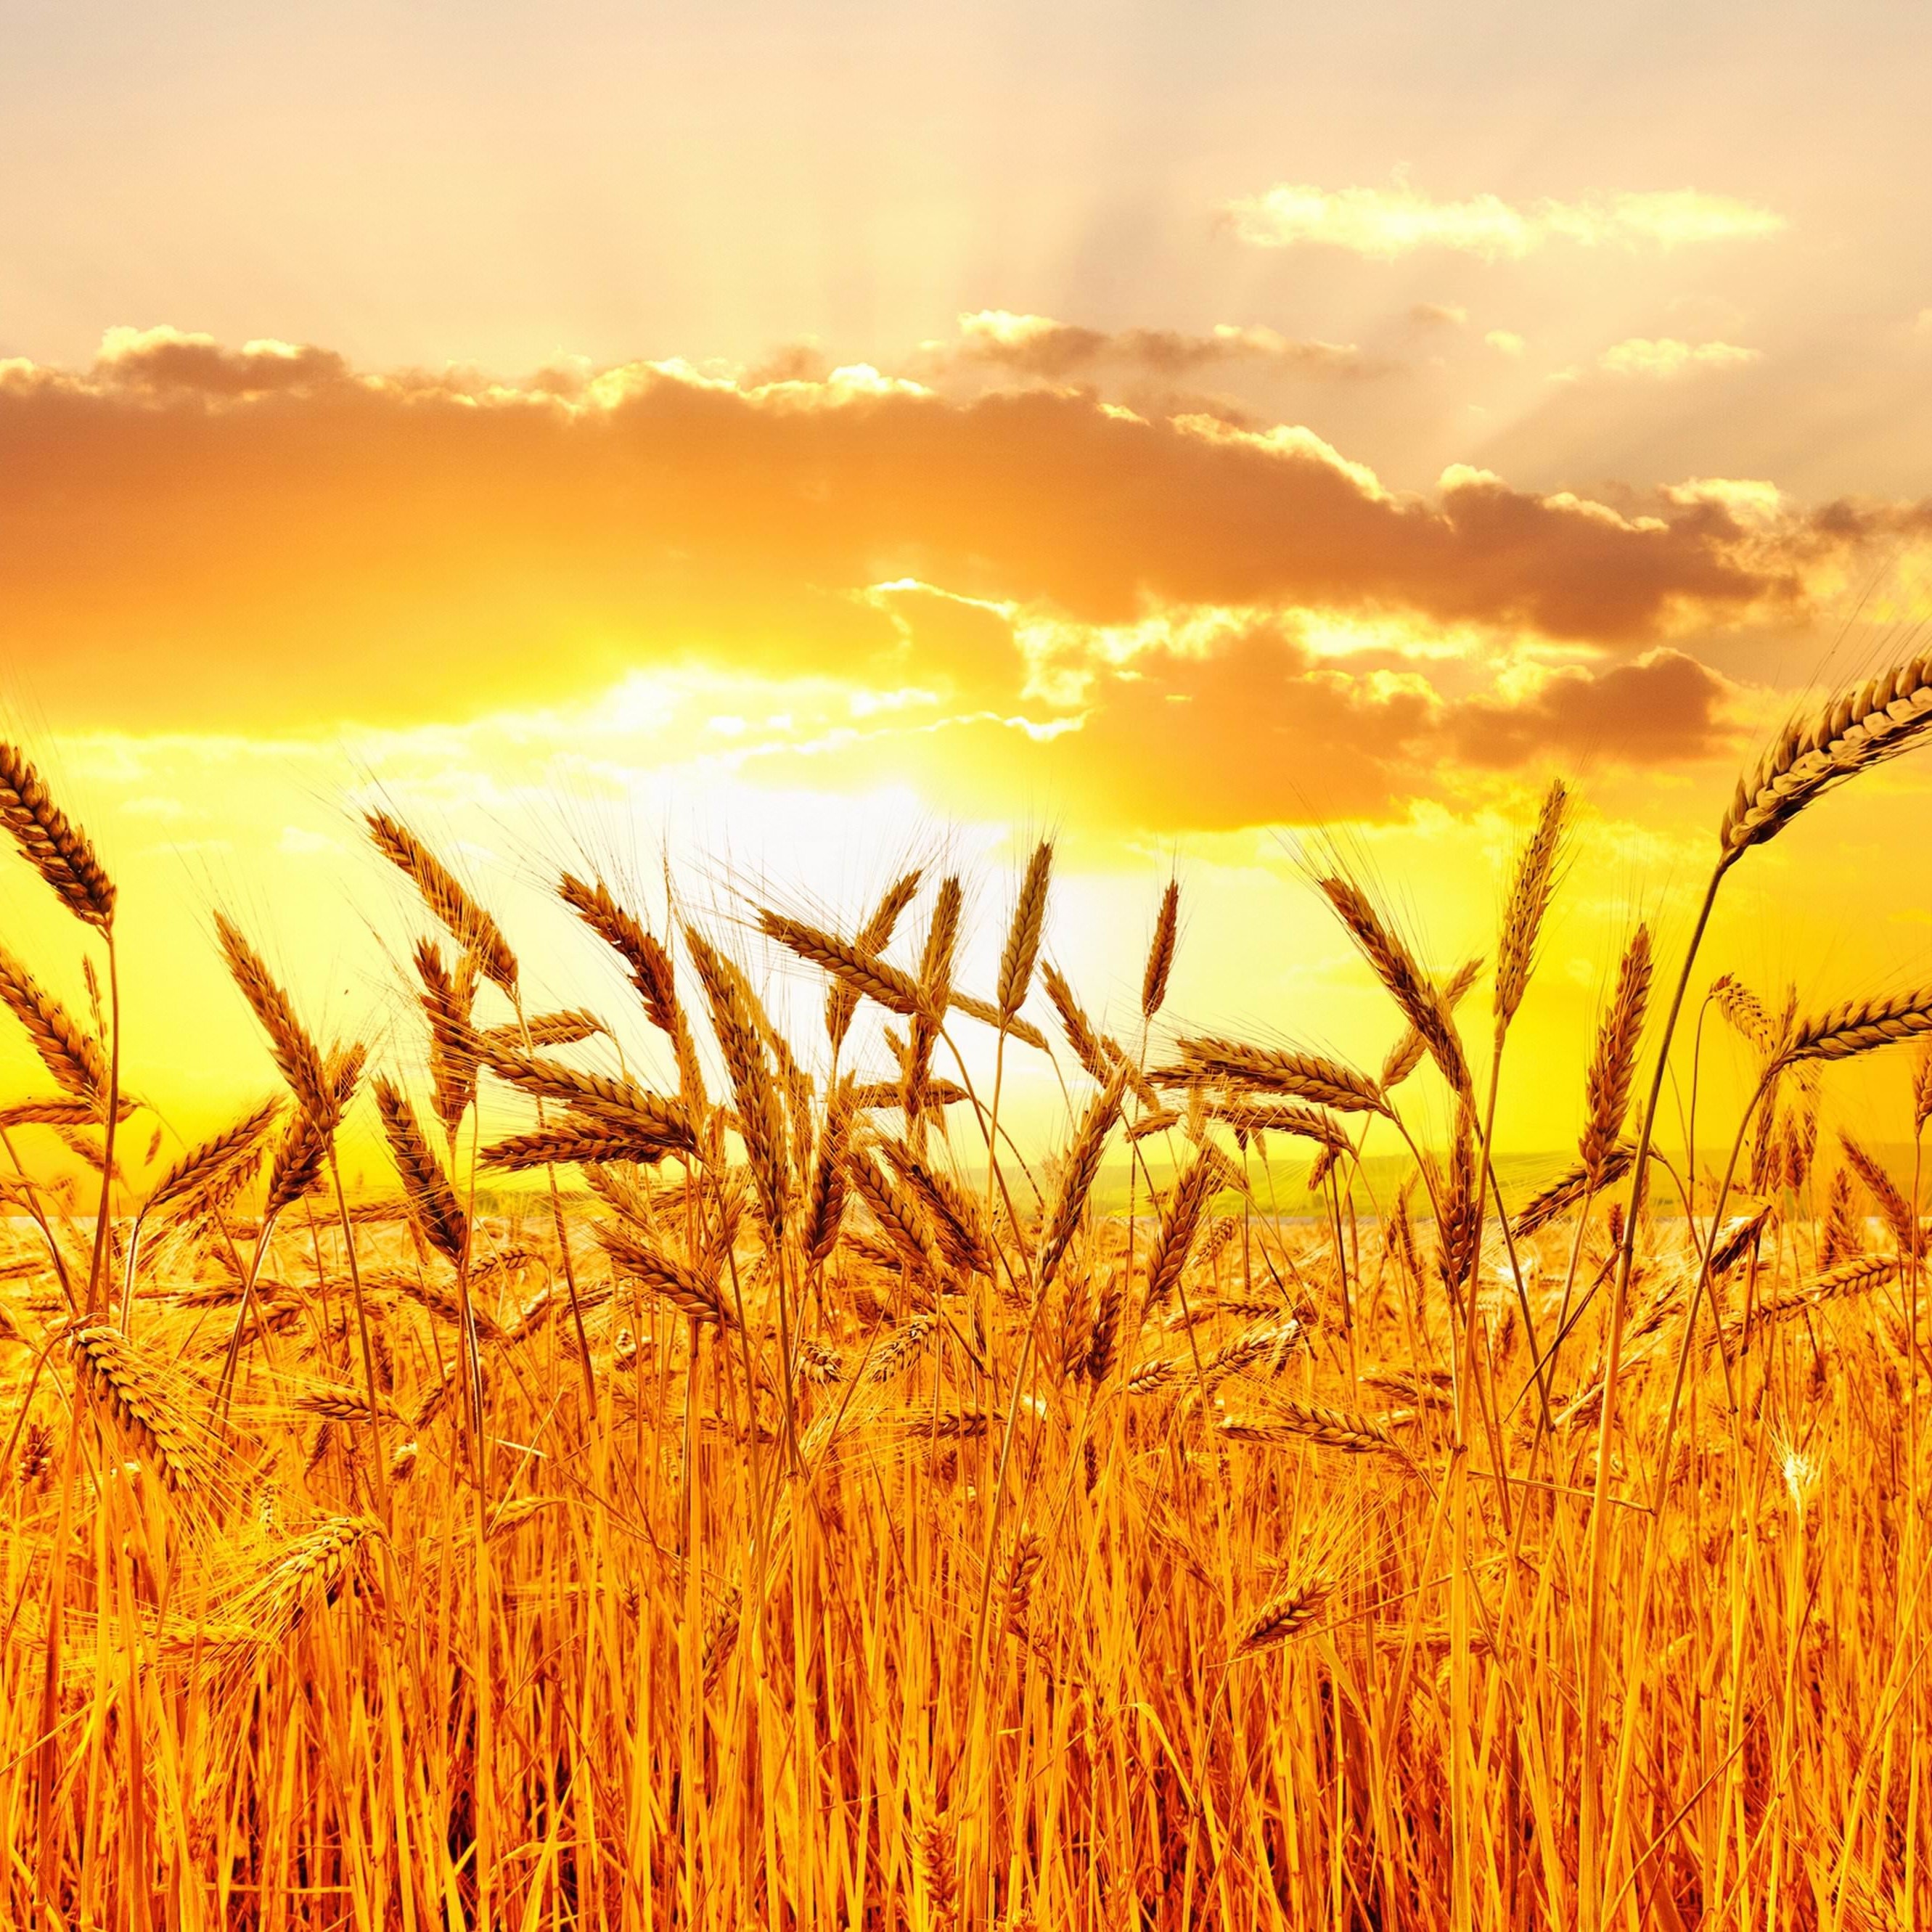 Golden Wheat Field At Sunset Wallpaper for Apple iPhone 6 Plus